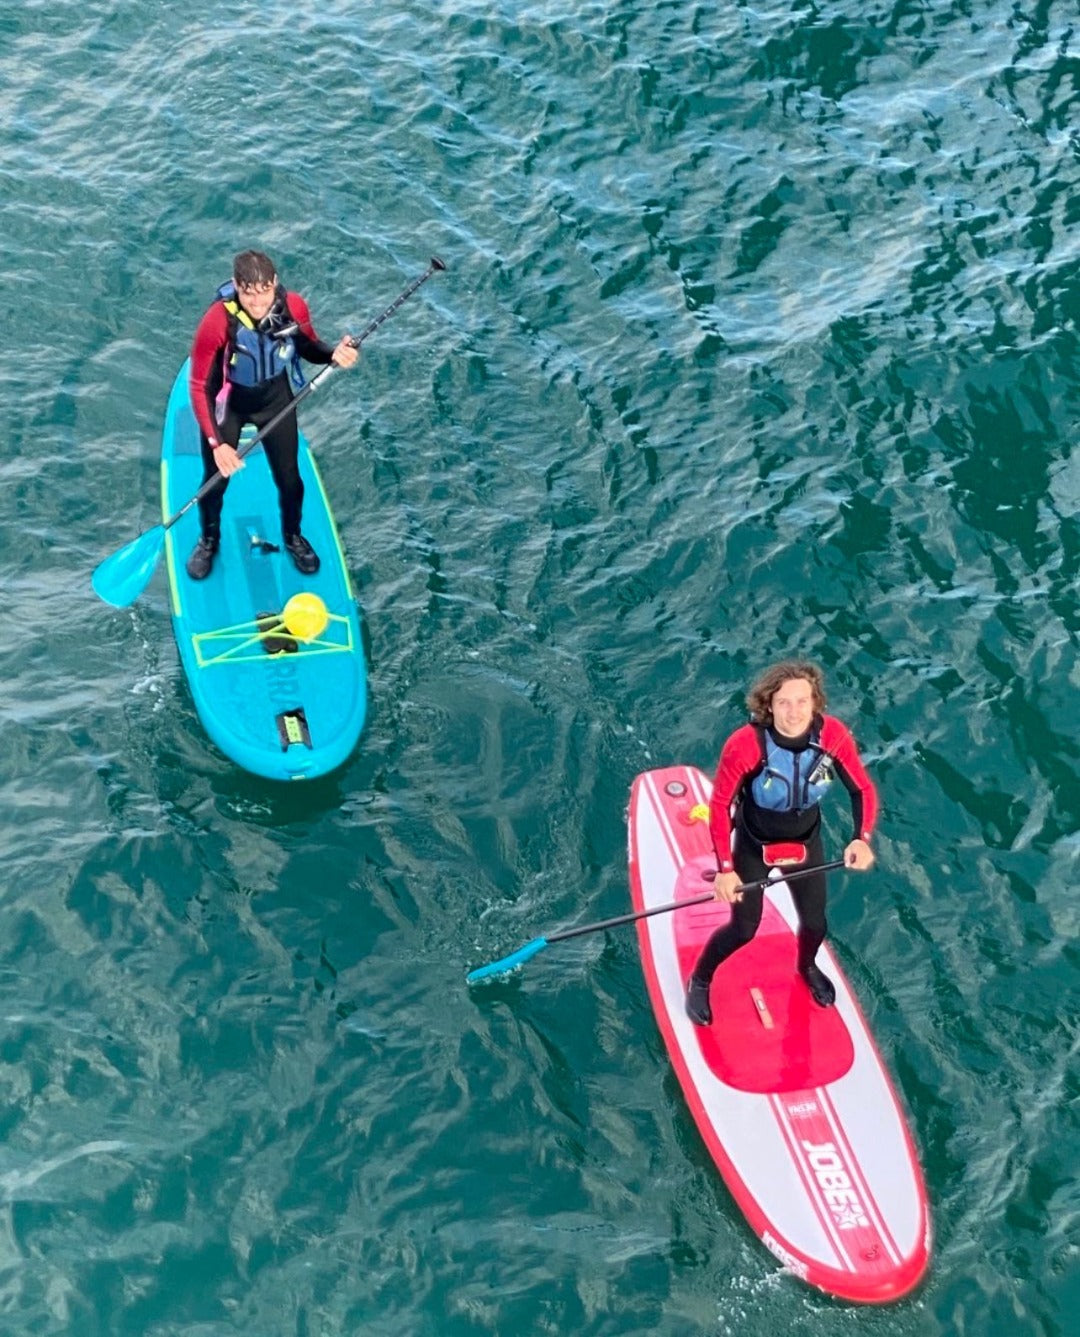 Paddle board tour, activities Brighton